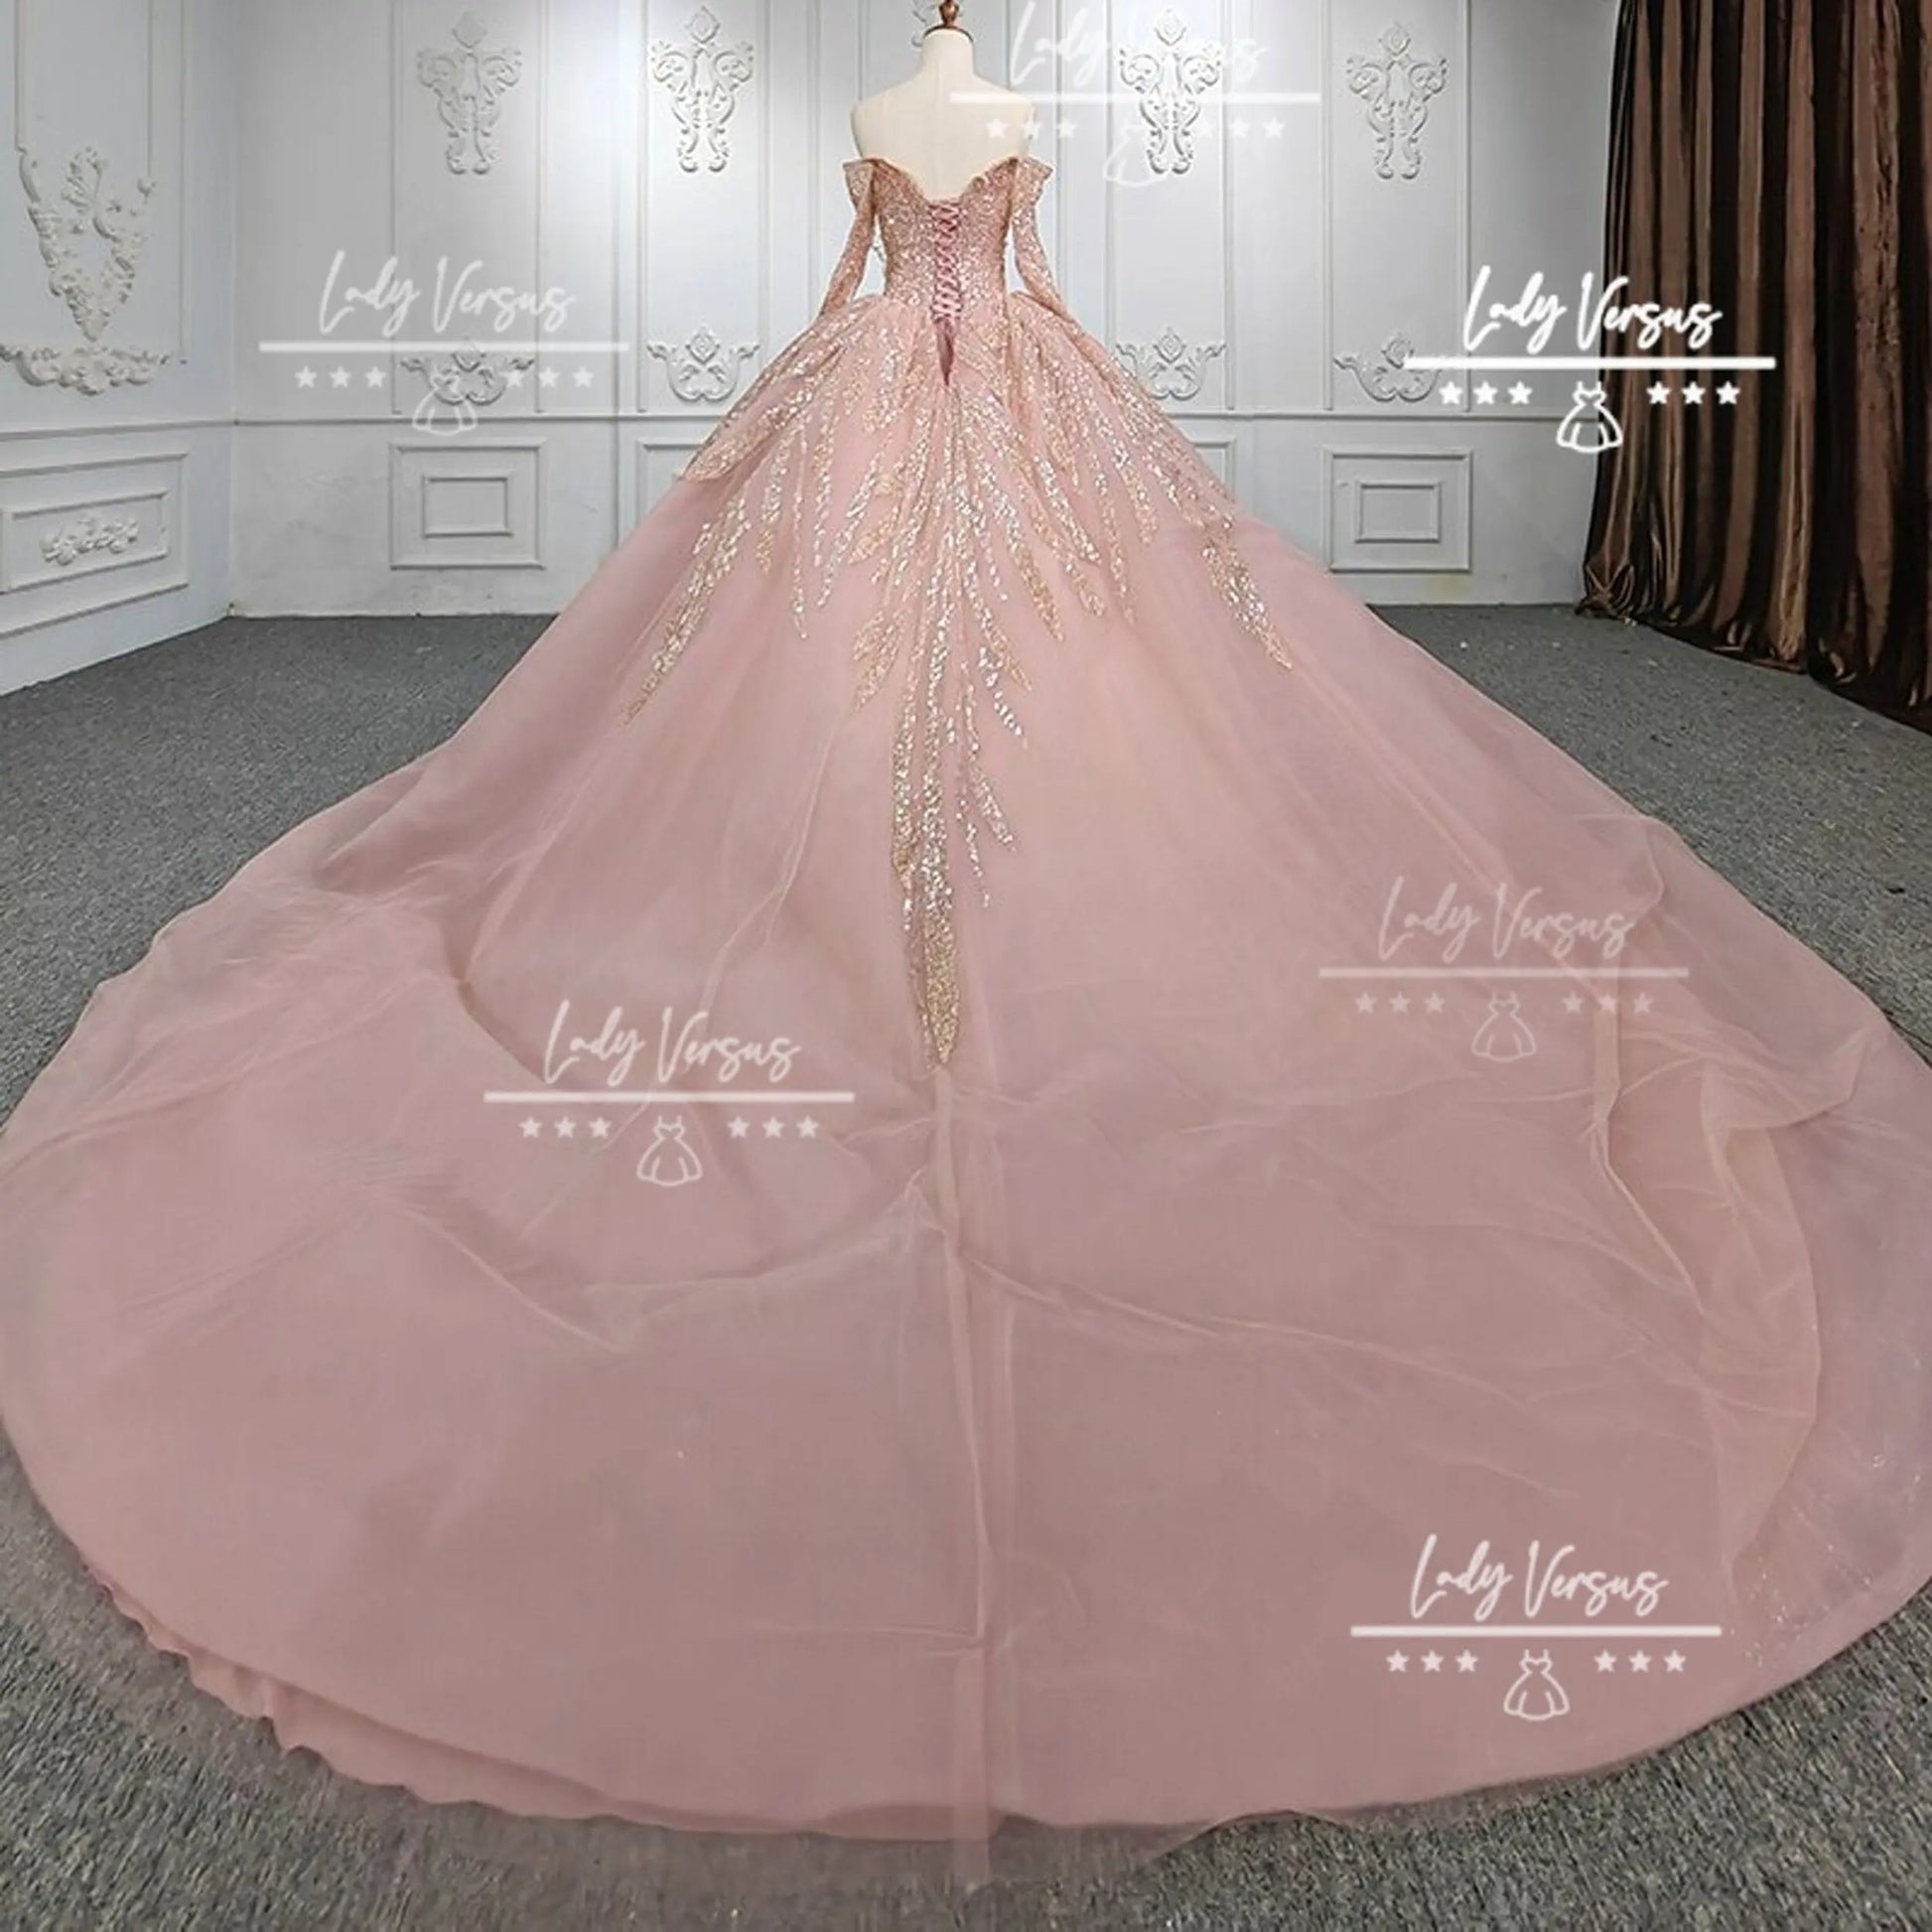 Luxury bridal princess dress/ Extravagant bridal gown/Gorgeous tulle cake skirt wedding dress/ ball gown/prom dress Lady Versus